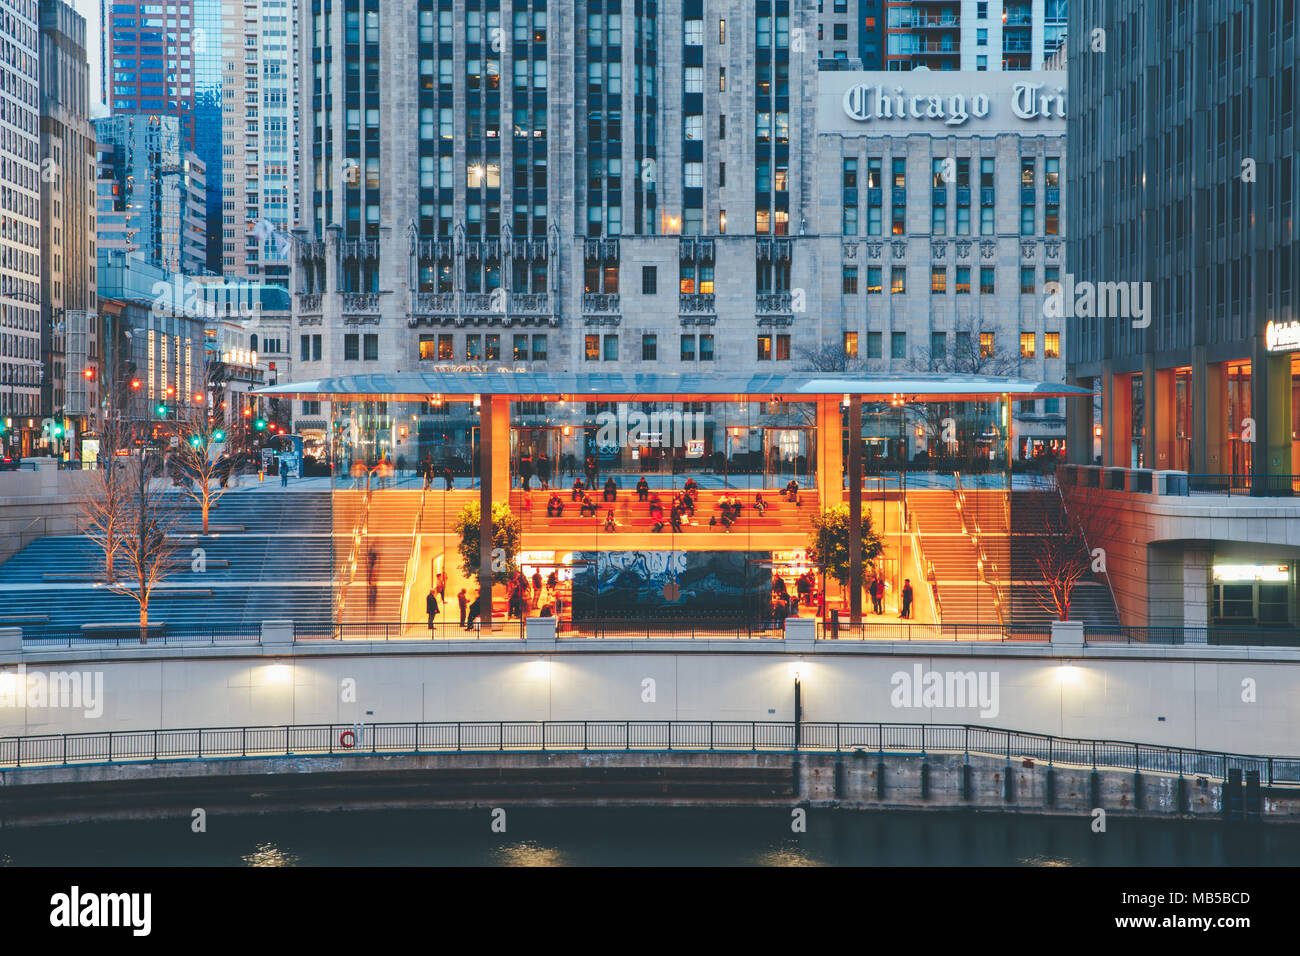 500 Apple Store Chicago Stock Photos, High-Res Pictures, and Images - Getty  Images